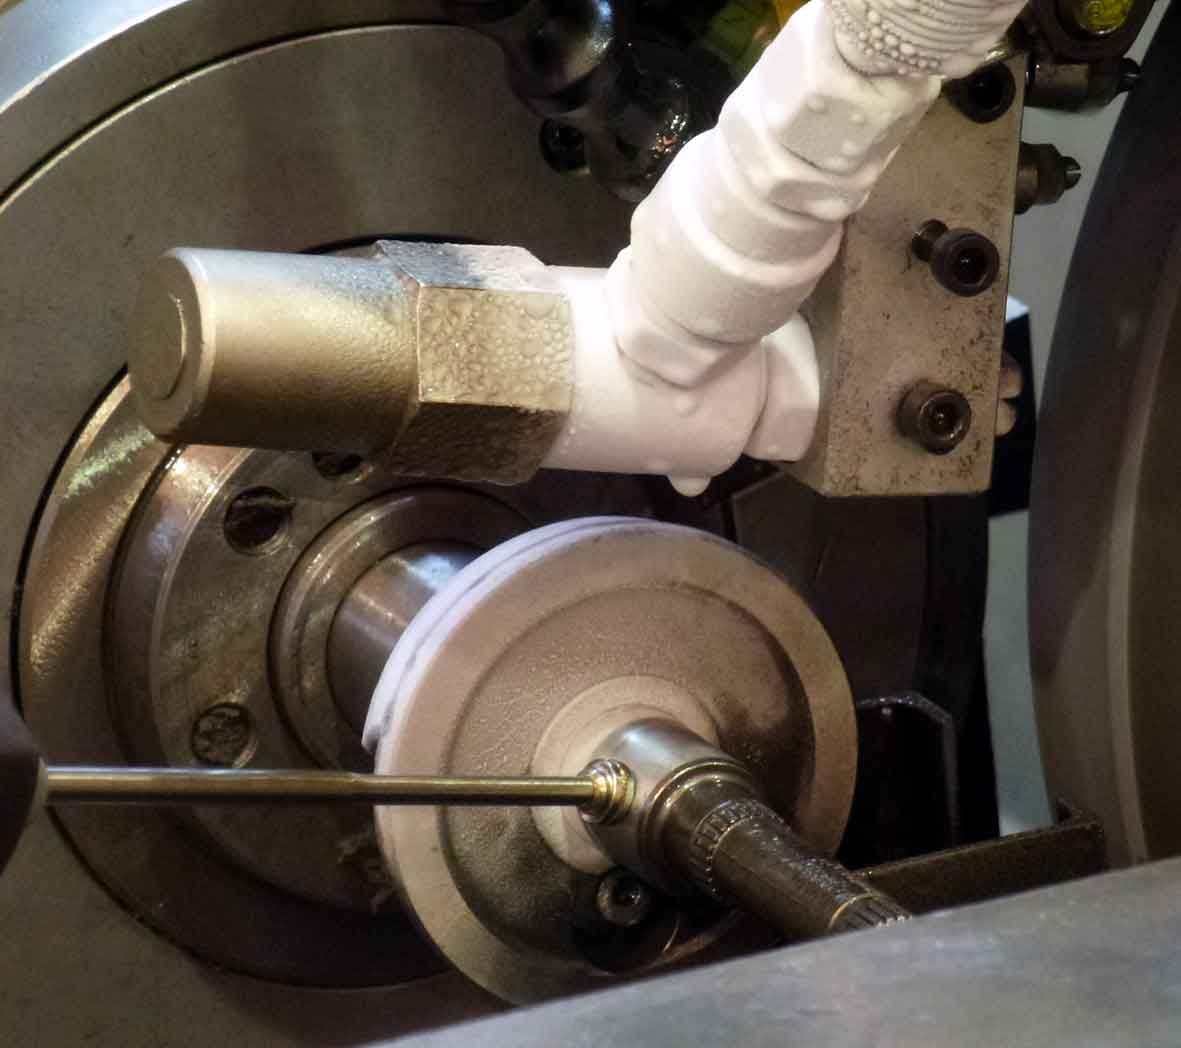 A grinding method based on using a minimal amount of lubrication.